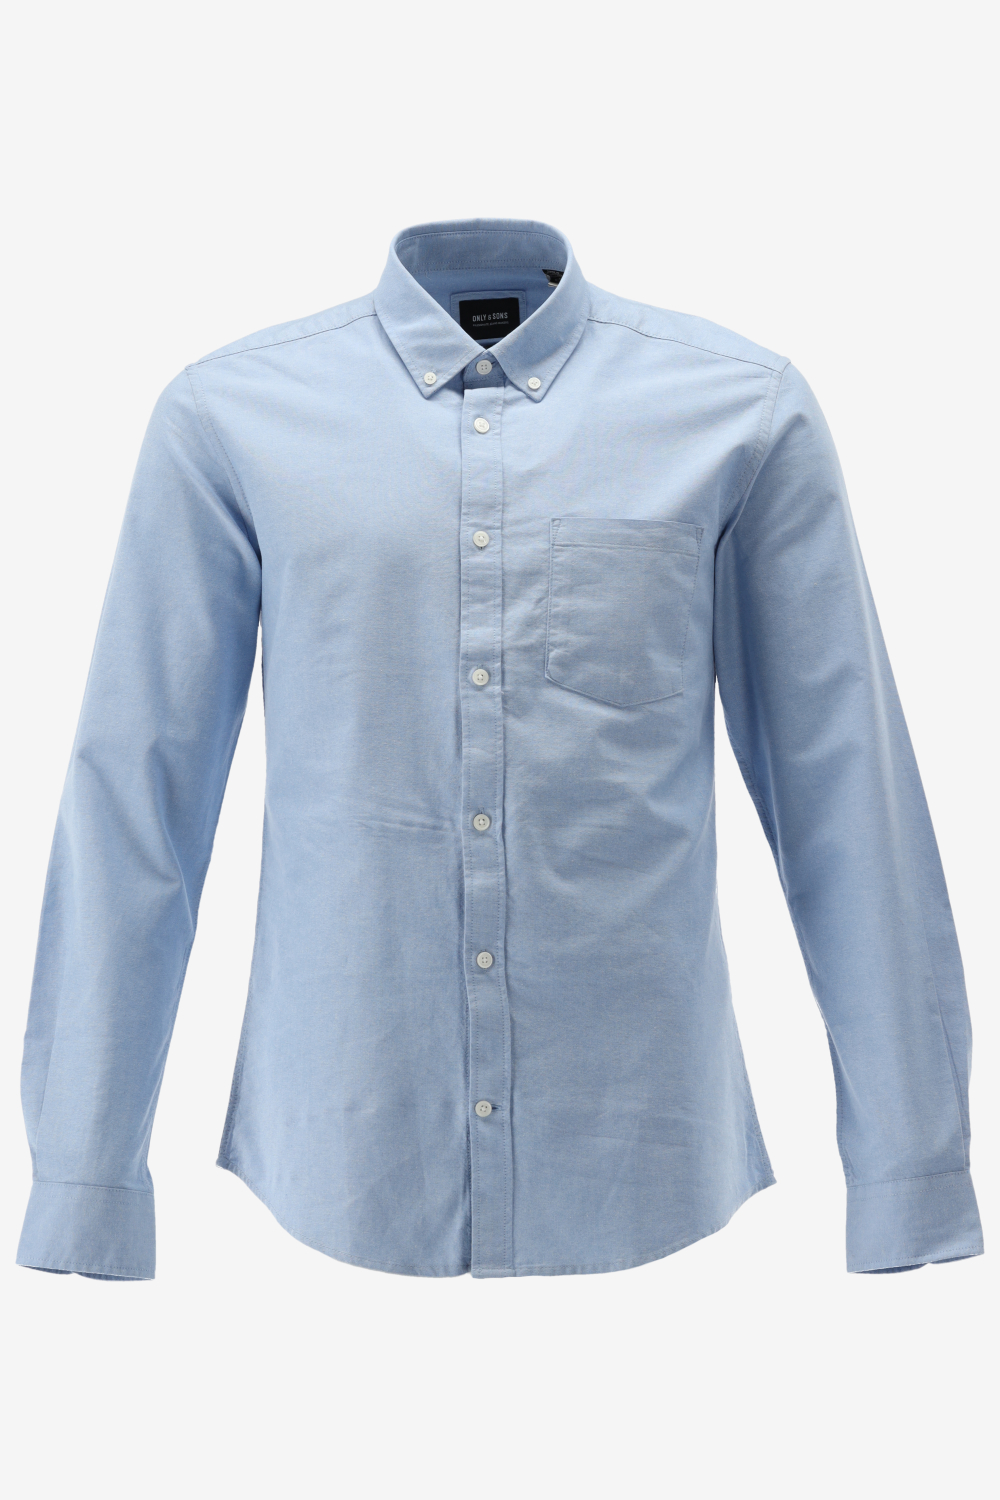 Only & Sons-Overhemd-Cashmere blue-Onsneil-S